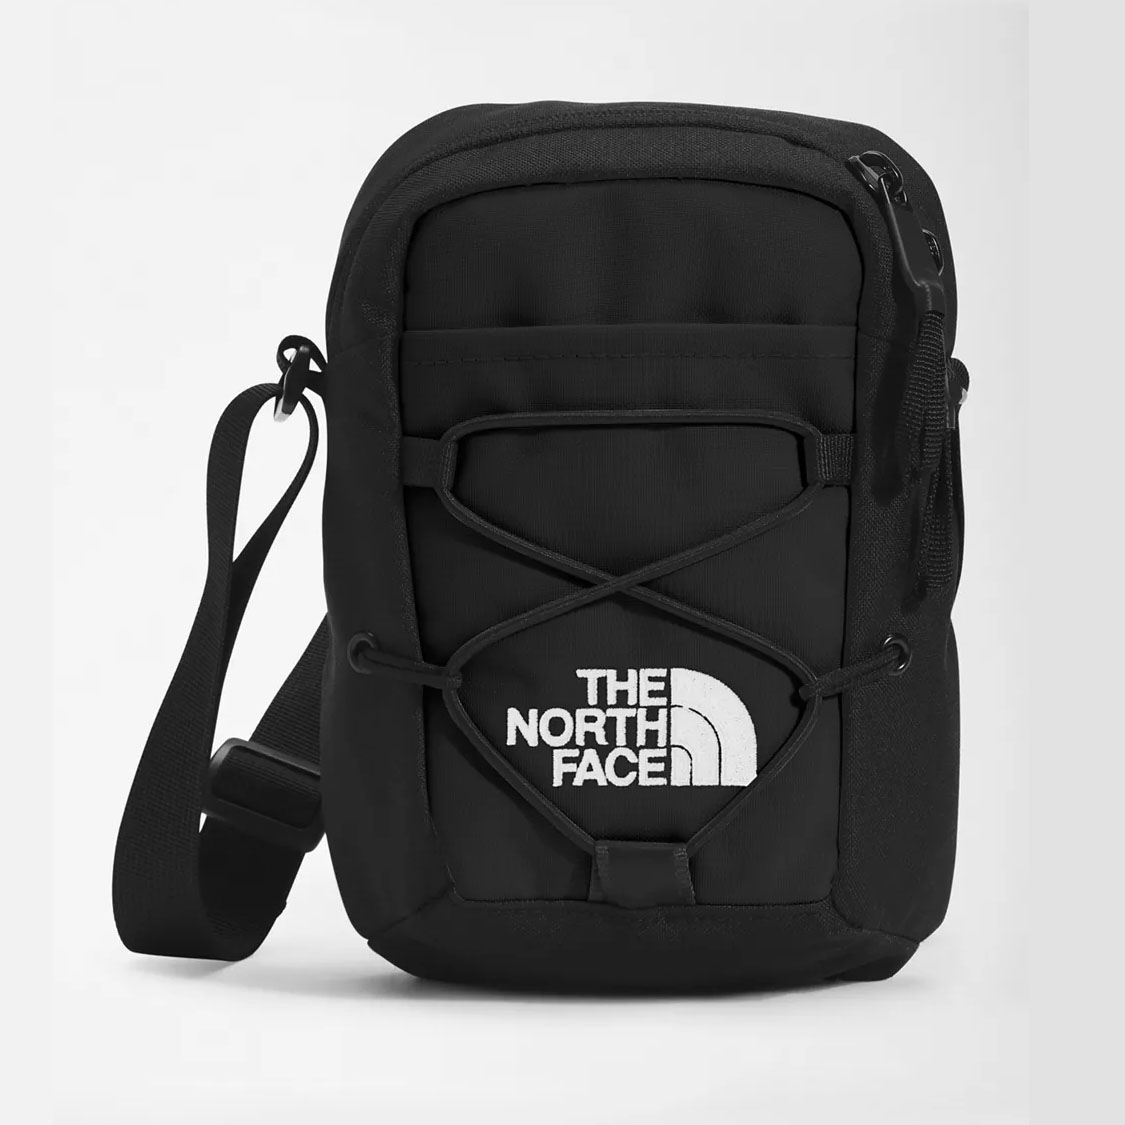 The North Face Jester Crossbody Pack in black with bungee detail 